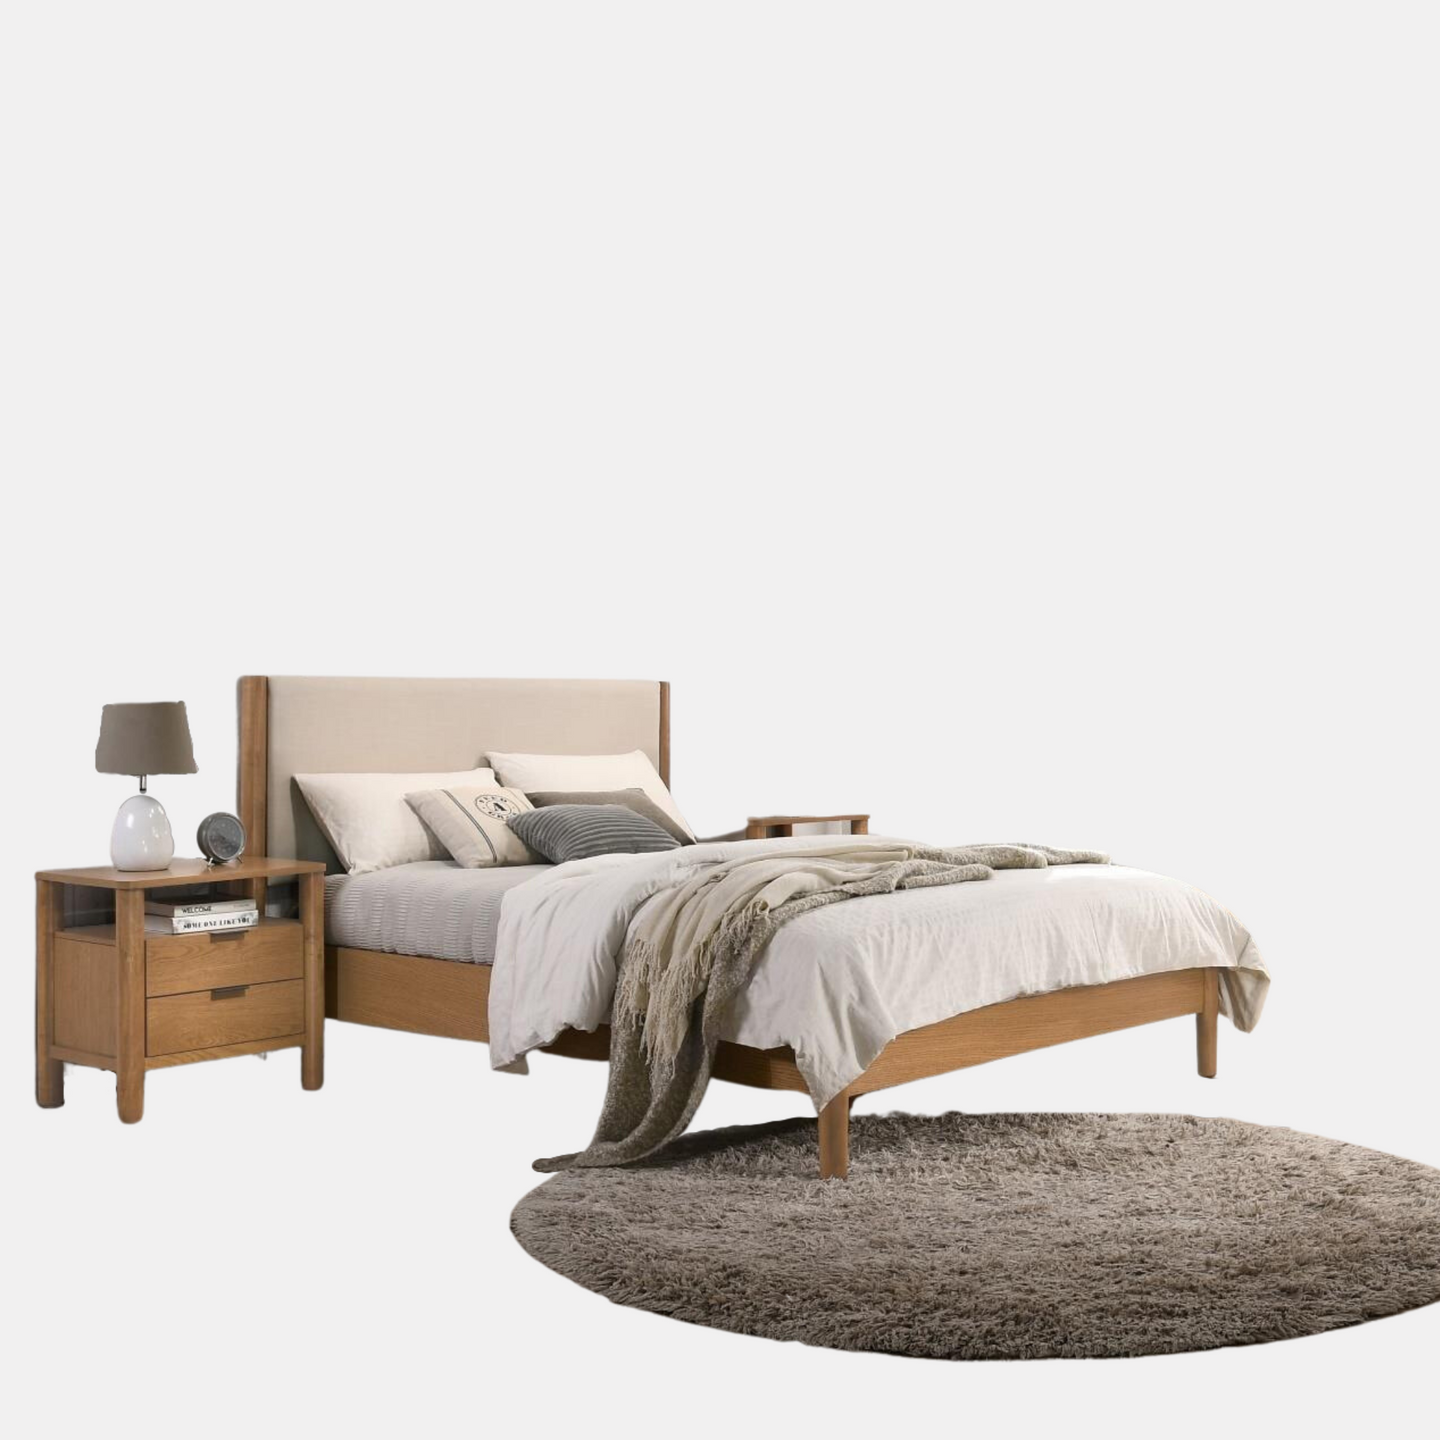 Miller bedframe - featuring an upholstered bedhead and oak timber finish